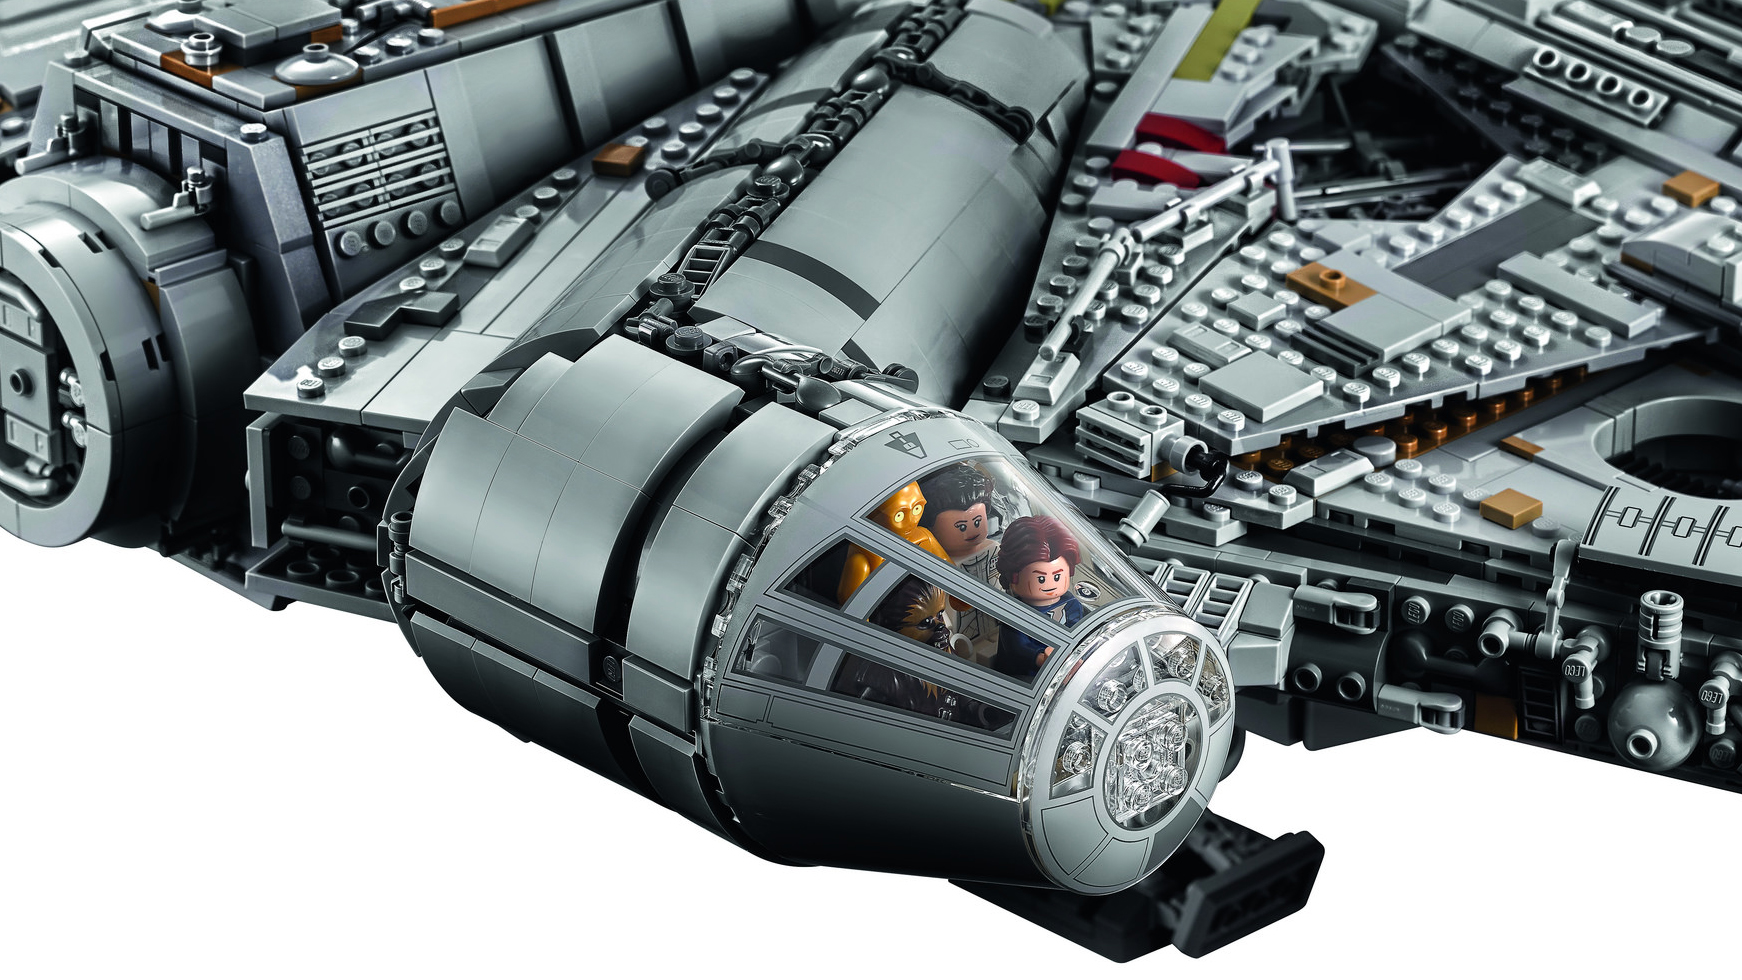 This 7,541-Piece Millennium Falcon Is The Largest, Most Desirable Lego Set Ever Created